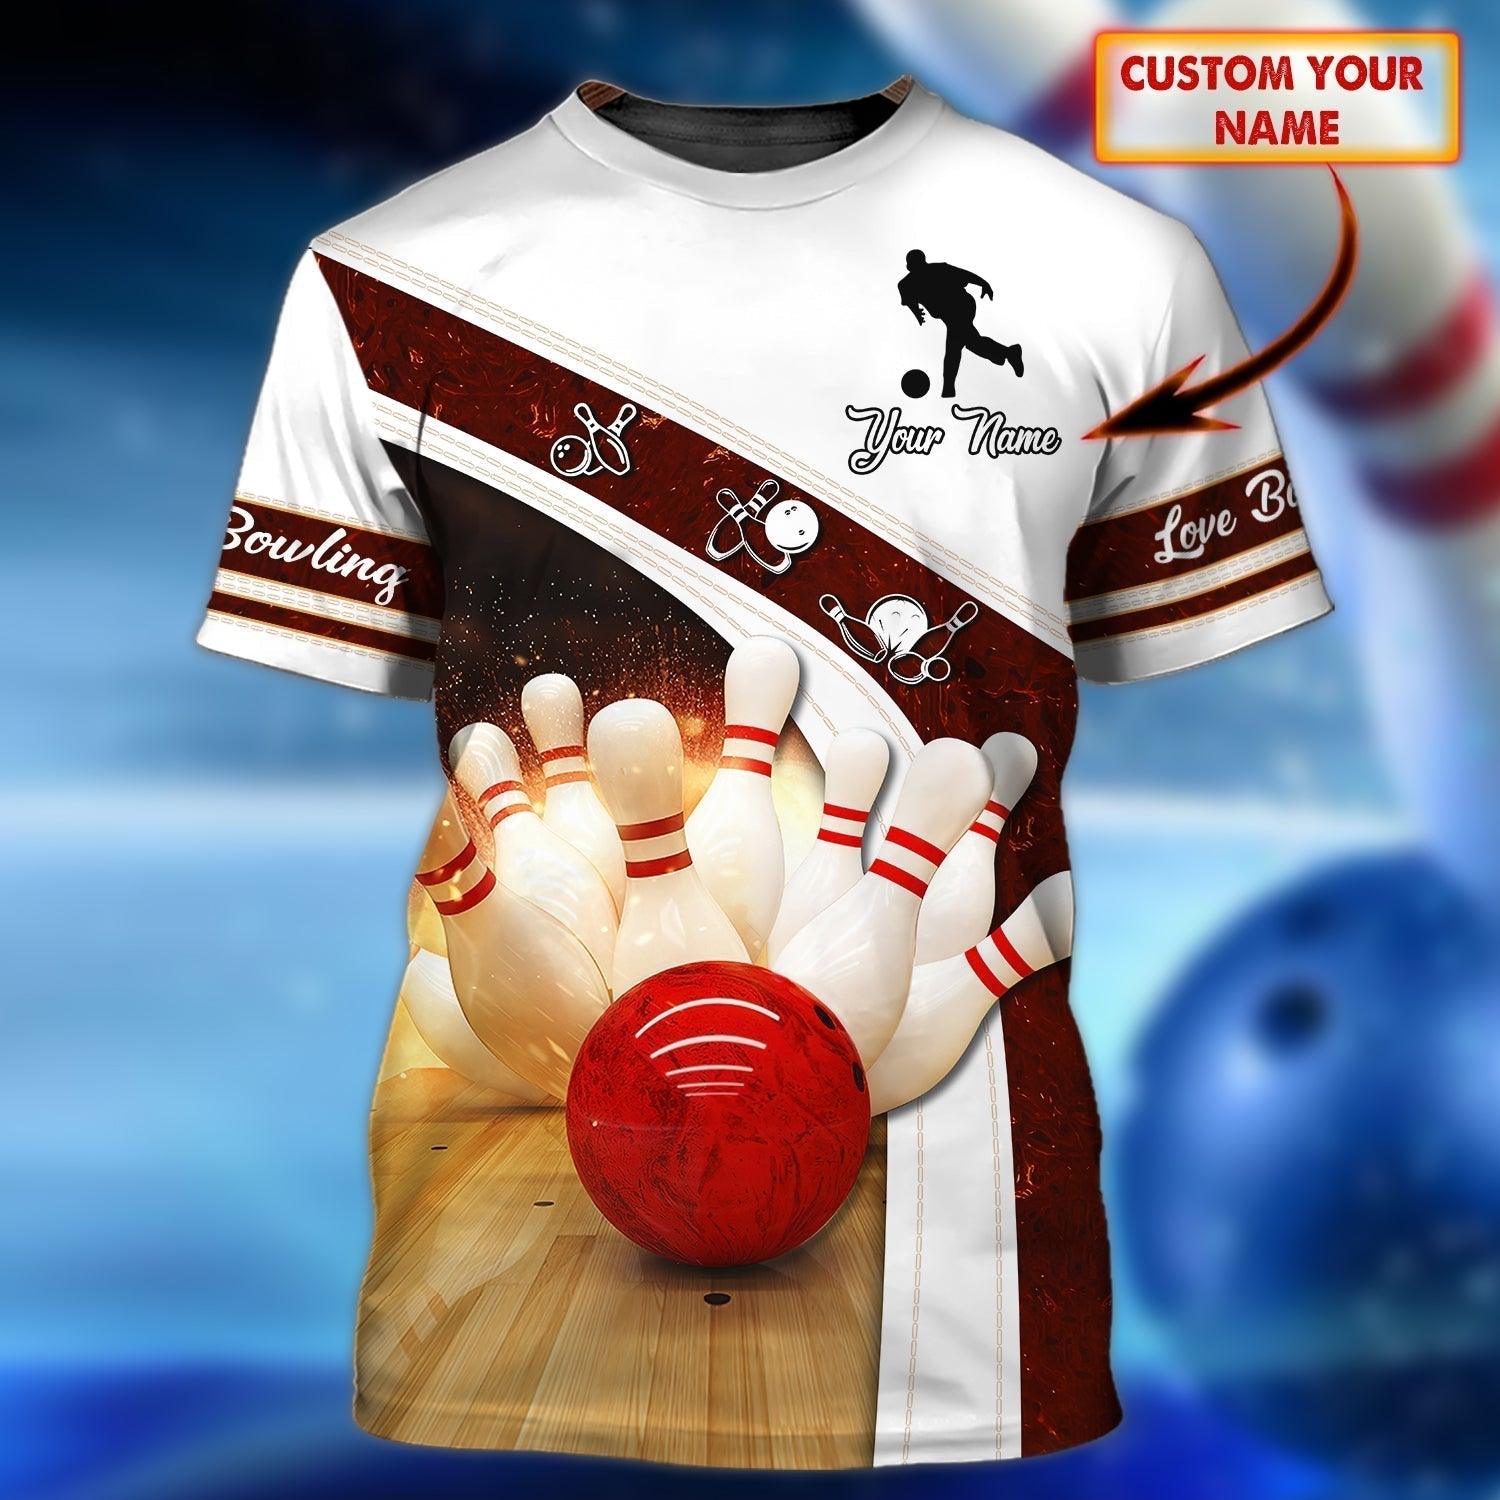 Customized Name Bowling T Shirt, Personalized Bowling Shirt For Men, Bowling Team Player Shirt - Perfect Gift For Bowling Lovers - Amzanimalsgift